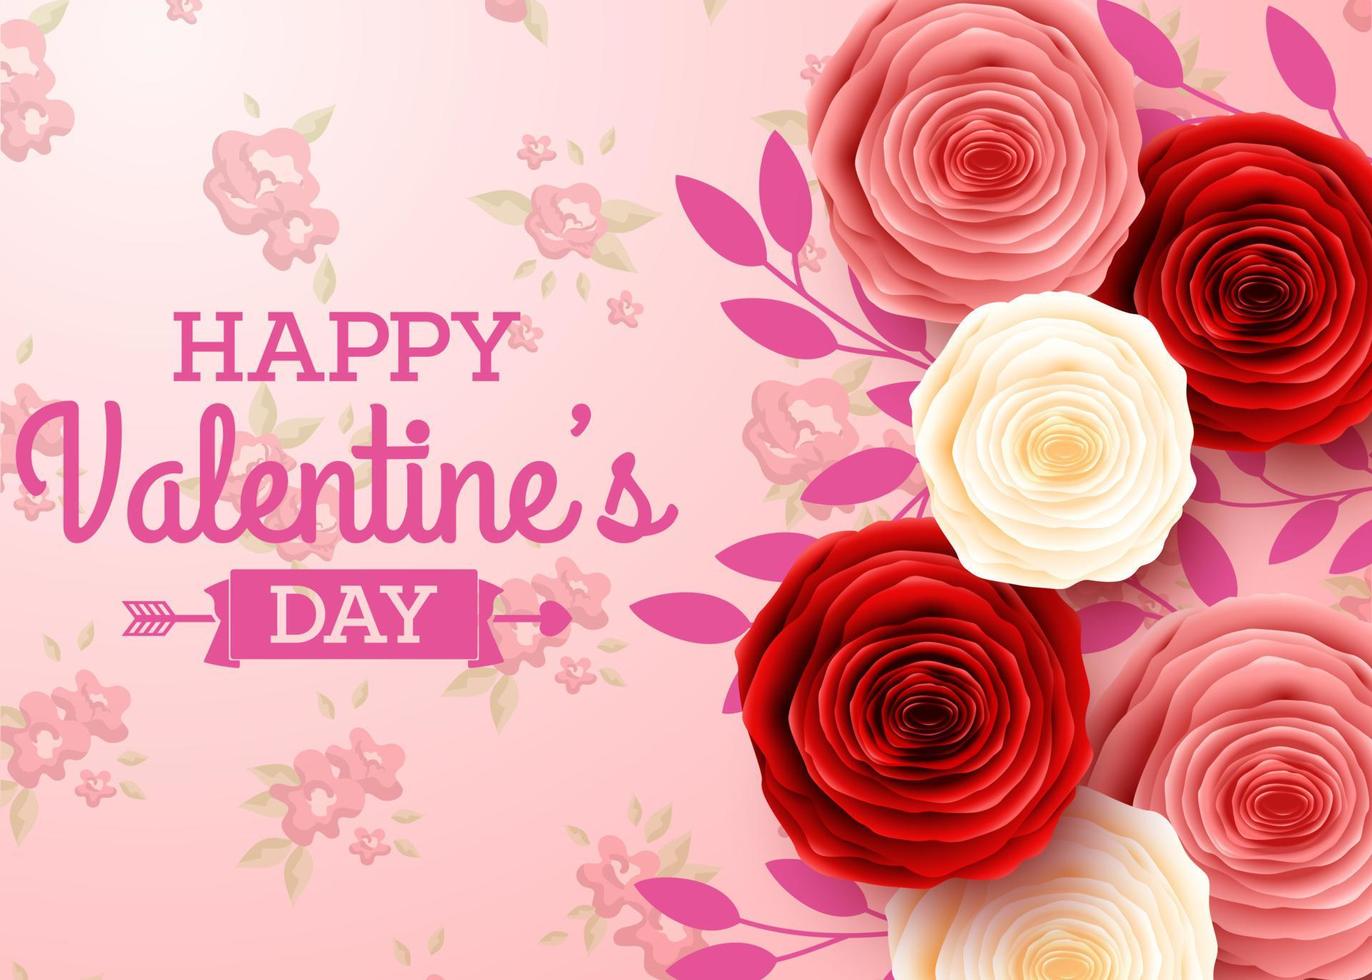 Valentines day greeting card with rose flower and hearts background vector